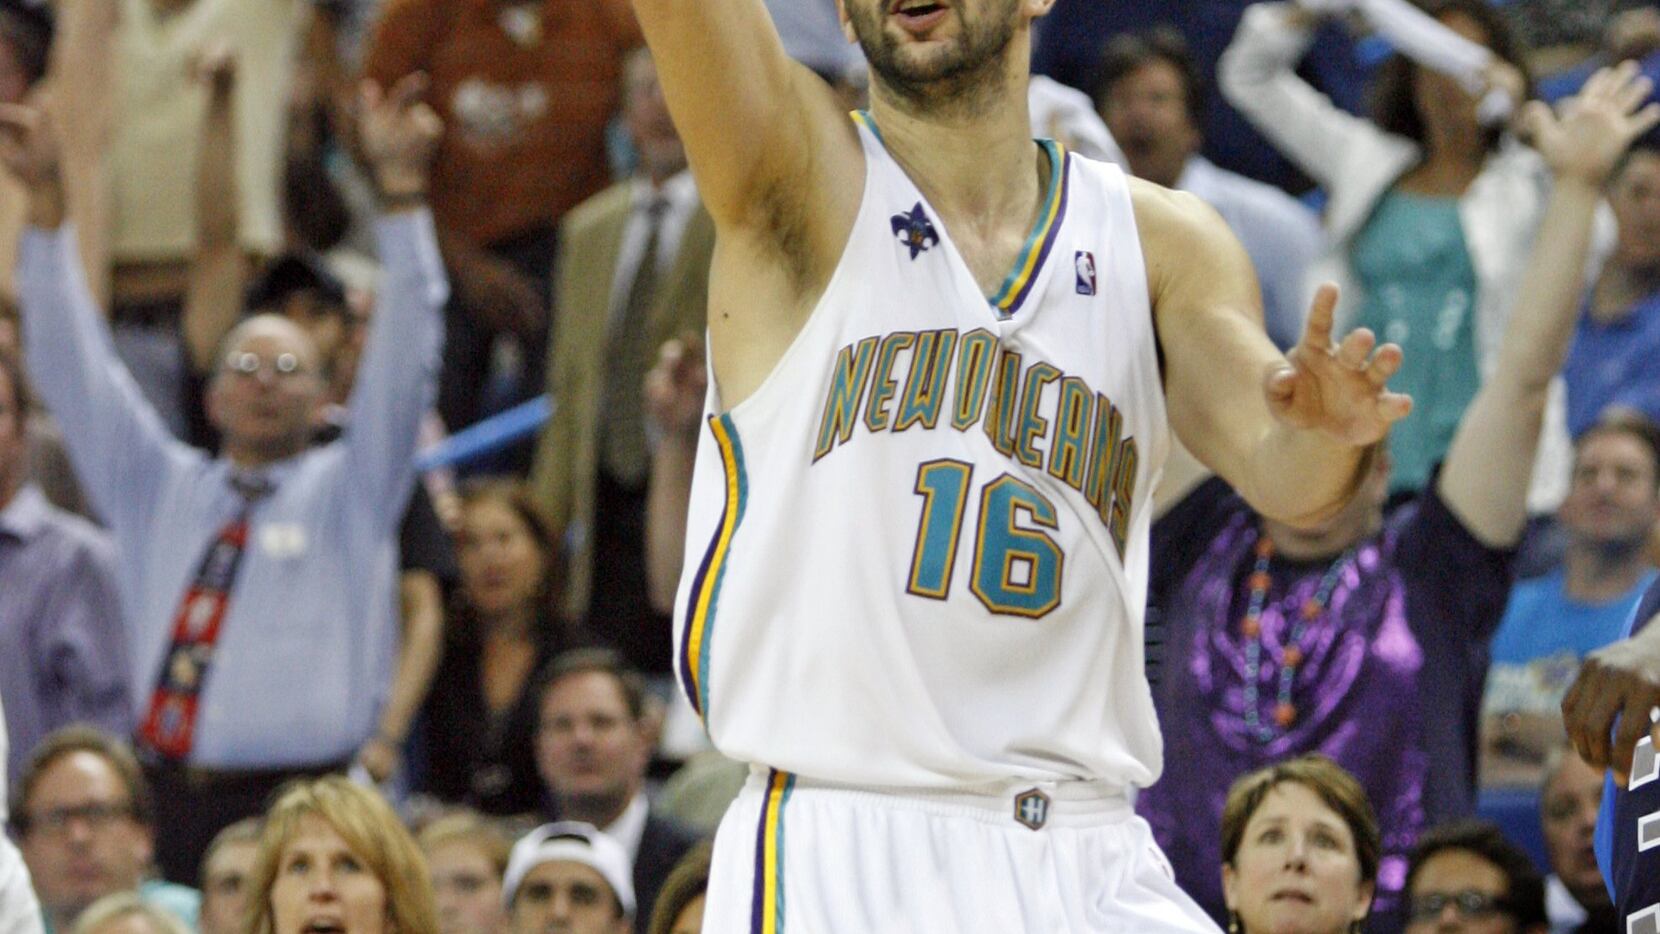 Peja Stojakovic: 16 things you may not know about him